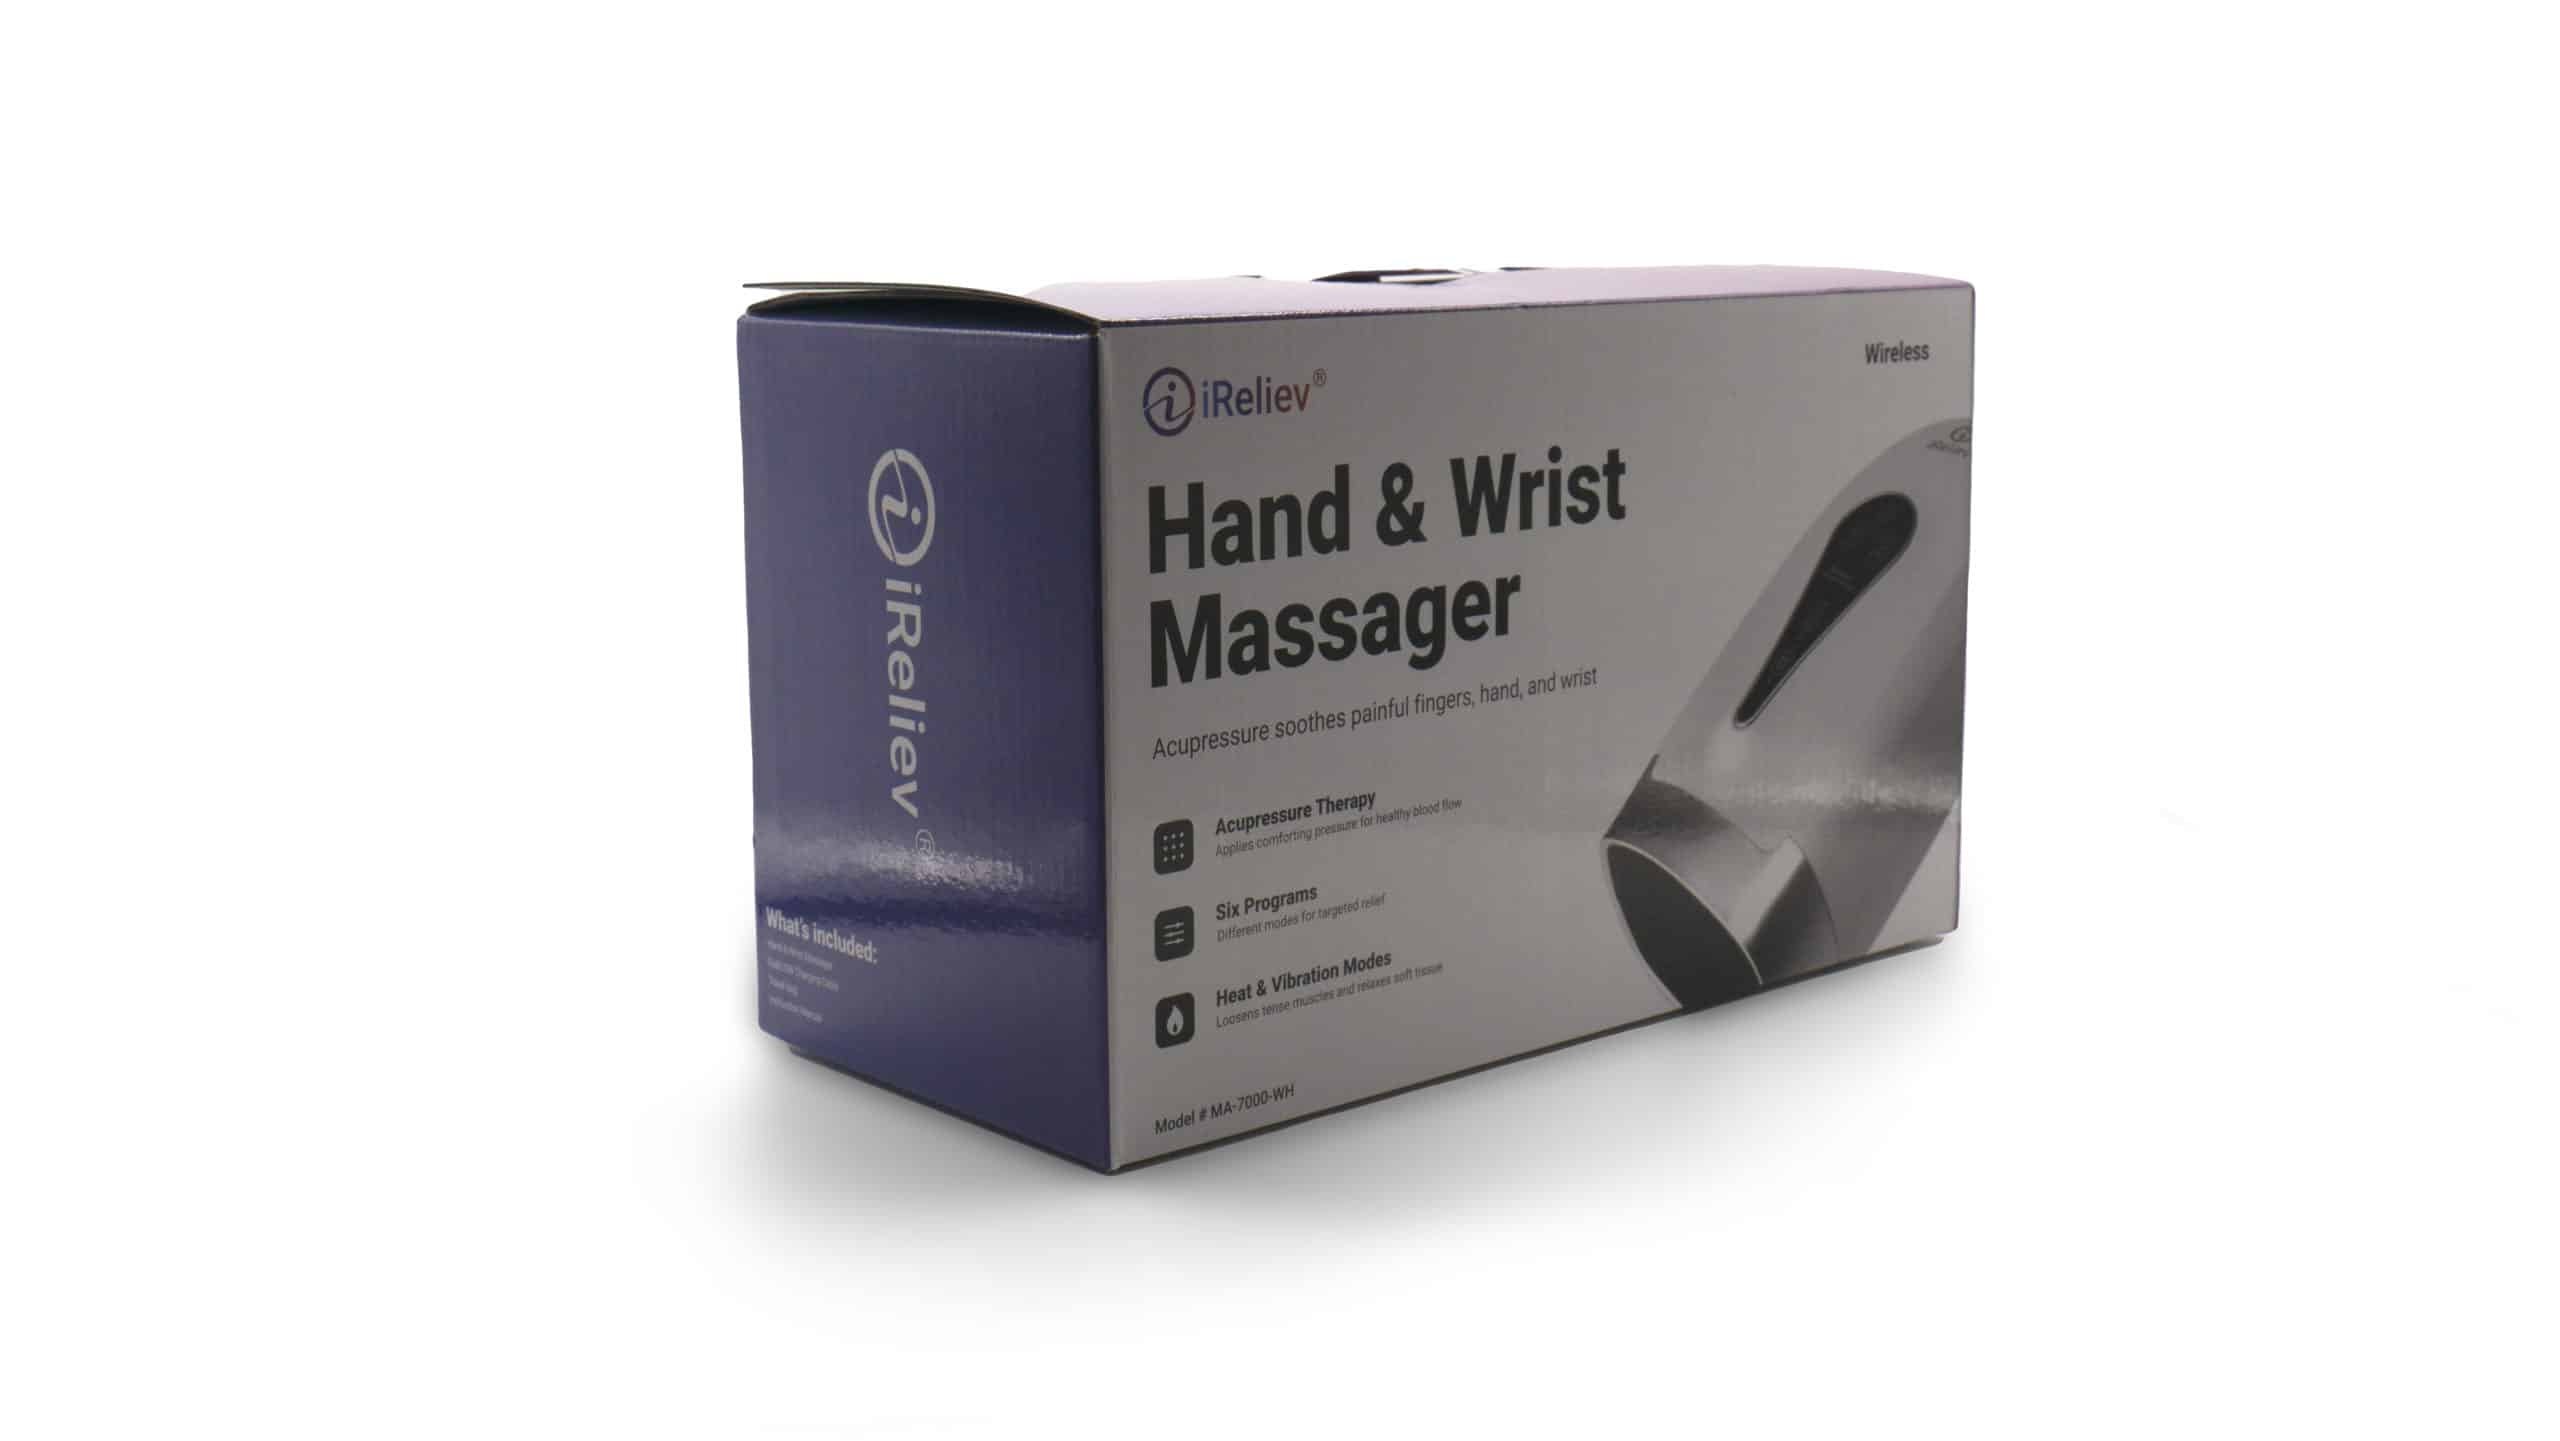 box for the iReliev hand massager